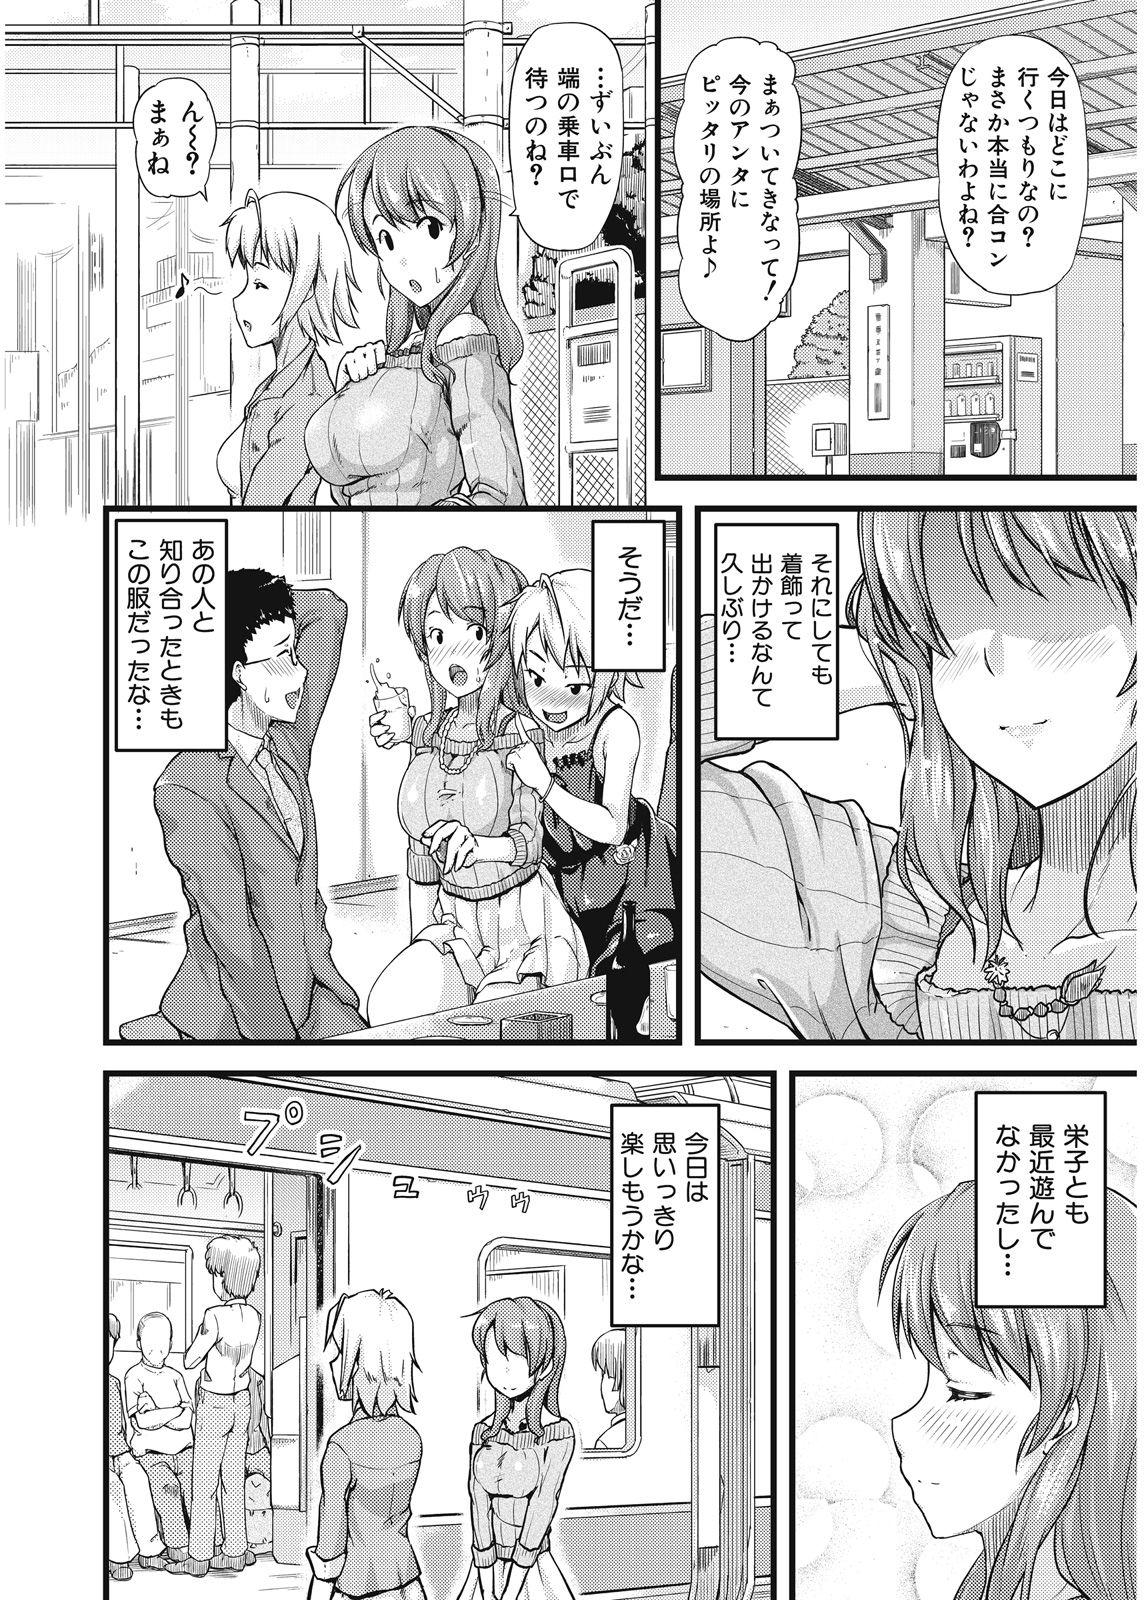 Best Blow Jobs Ever 不倫専用！チカンエクスプレス～発射は１８時１９分！？～ Putas - Page 9